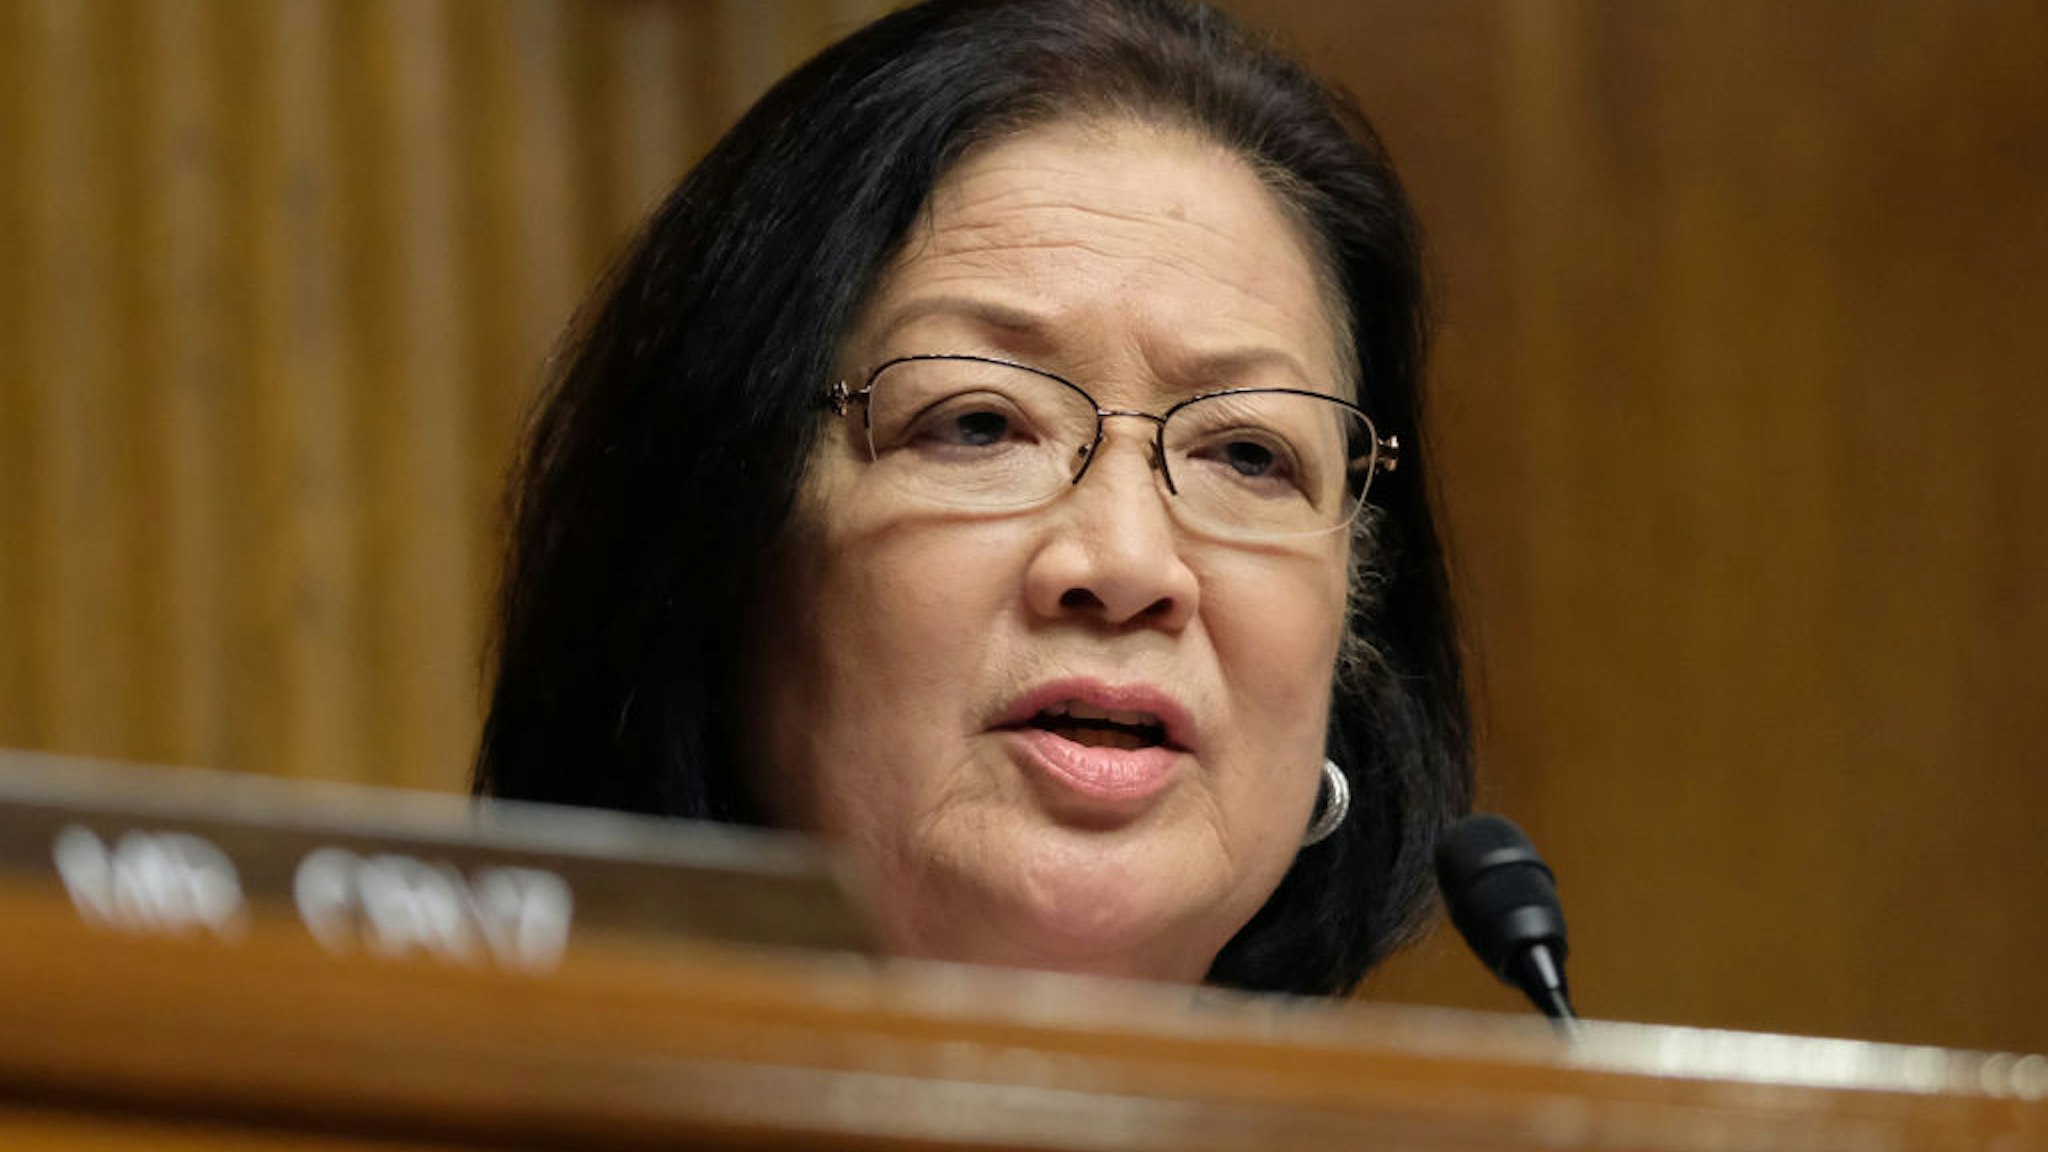 Sen. Mazie Hirono (D-HI) speaks at a Senate Judiciary Committee hearing on April 10, 2019 in Washington, DC. The Republican-controlled Senate Judiciary Committee is questioning whether large tech companies are biased towards conservatives.